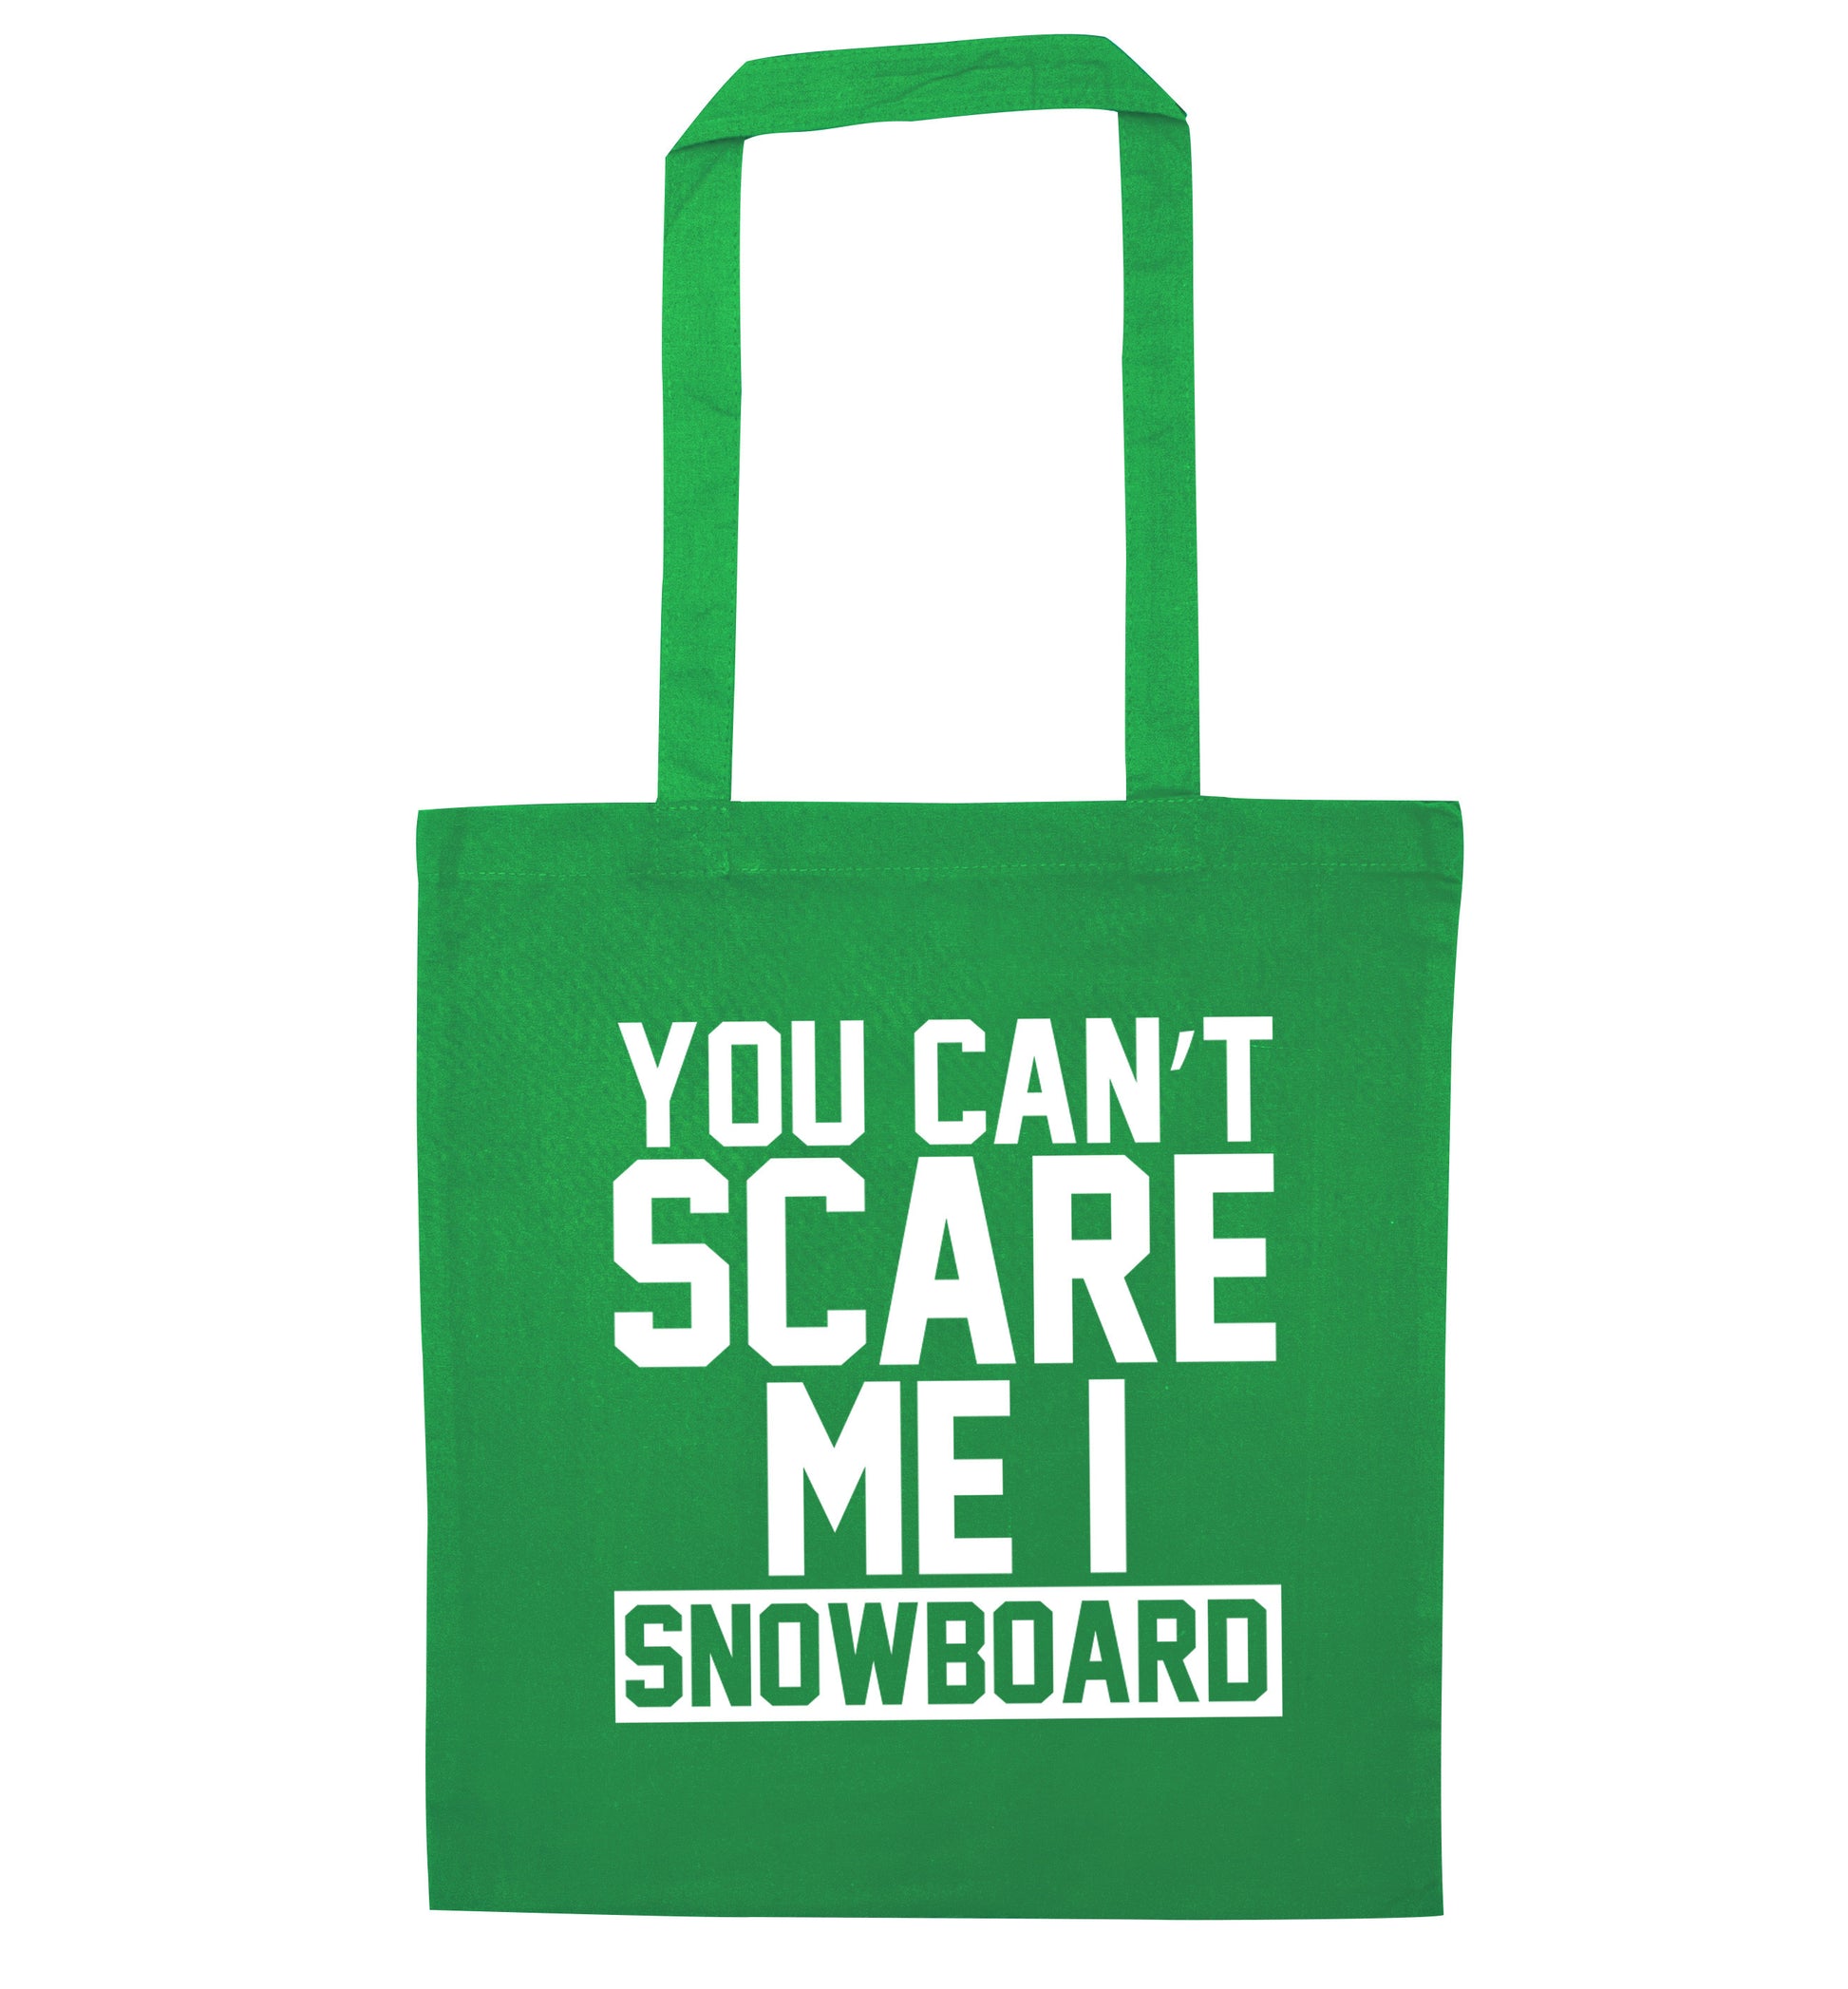 You can't scare me I snowboard green tote bag